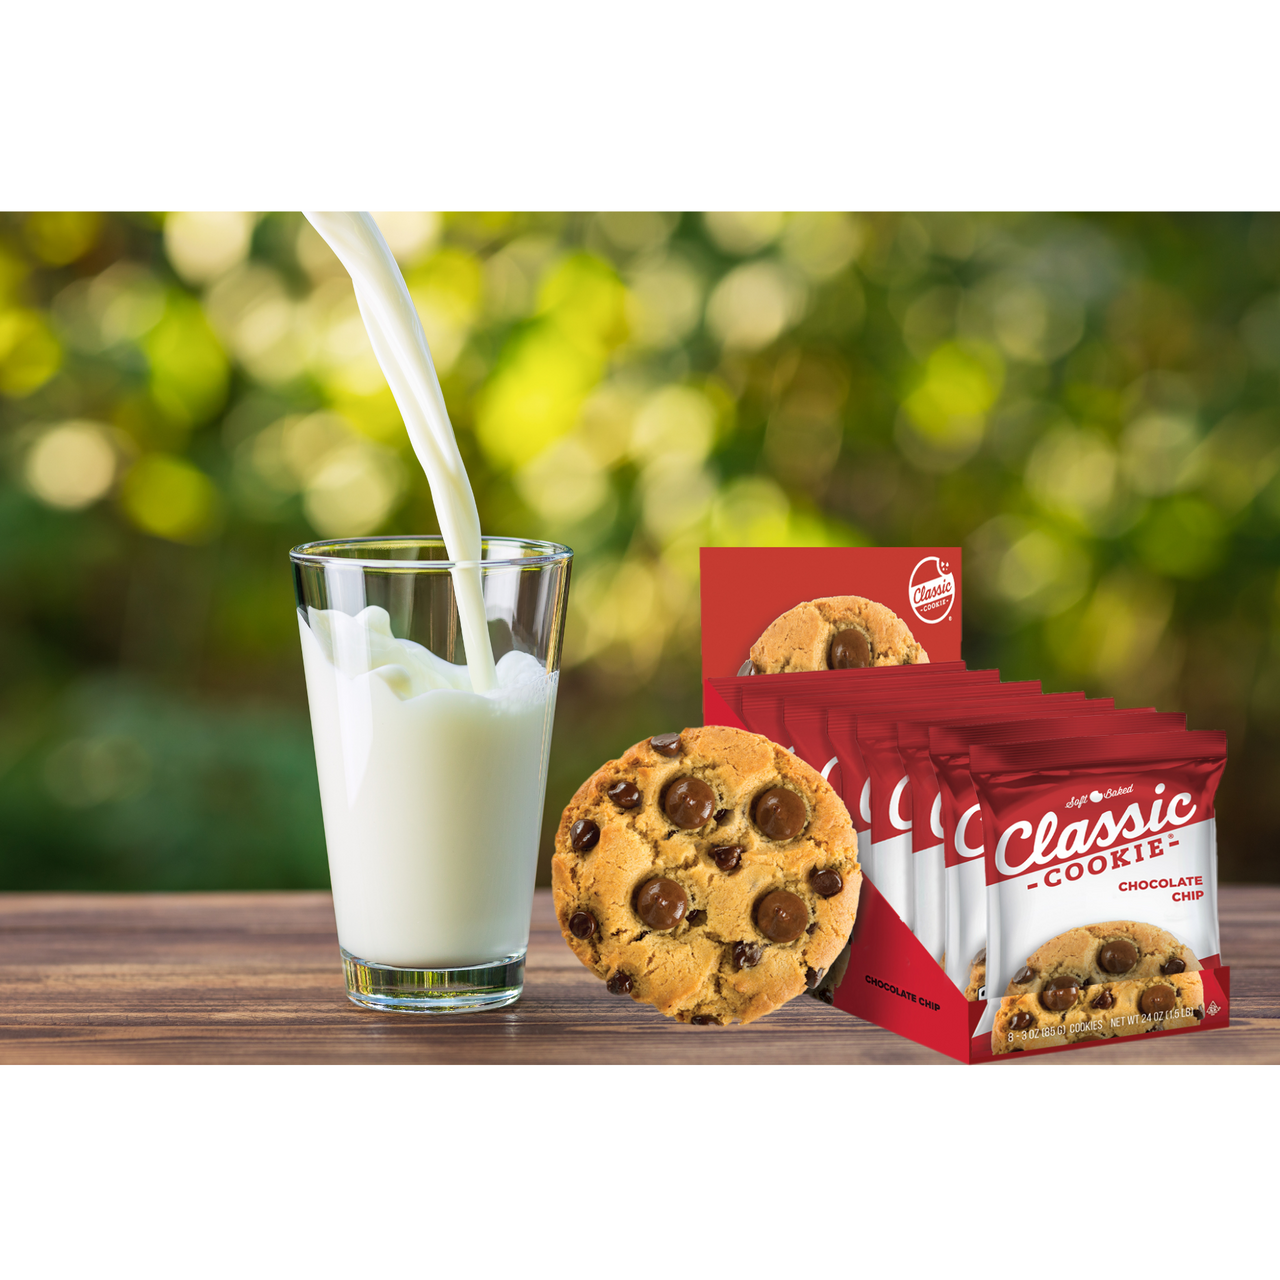 Variety Pack Full Sampler - Try All Classic Cookie Soft Baked Flavors